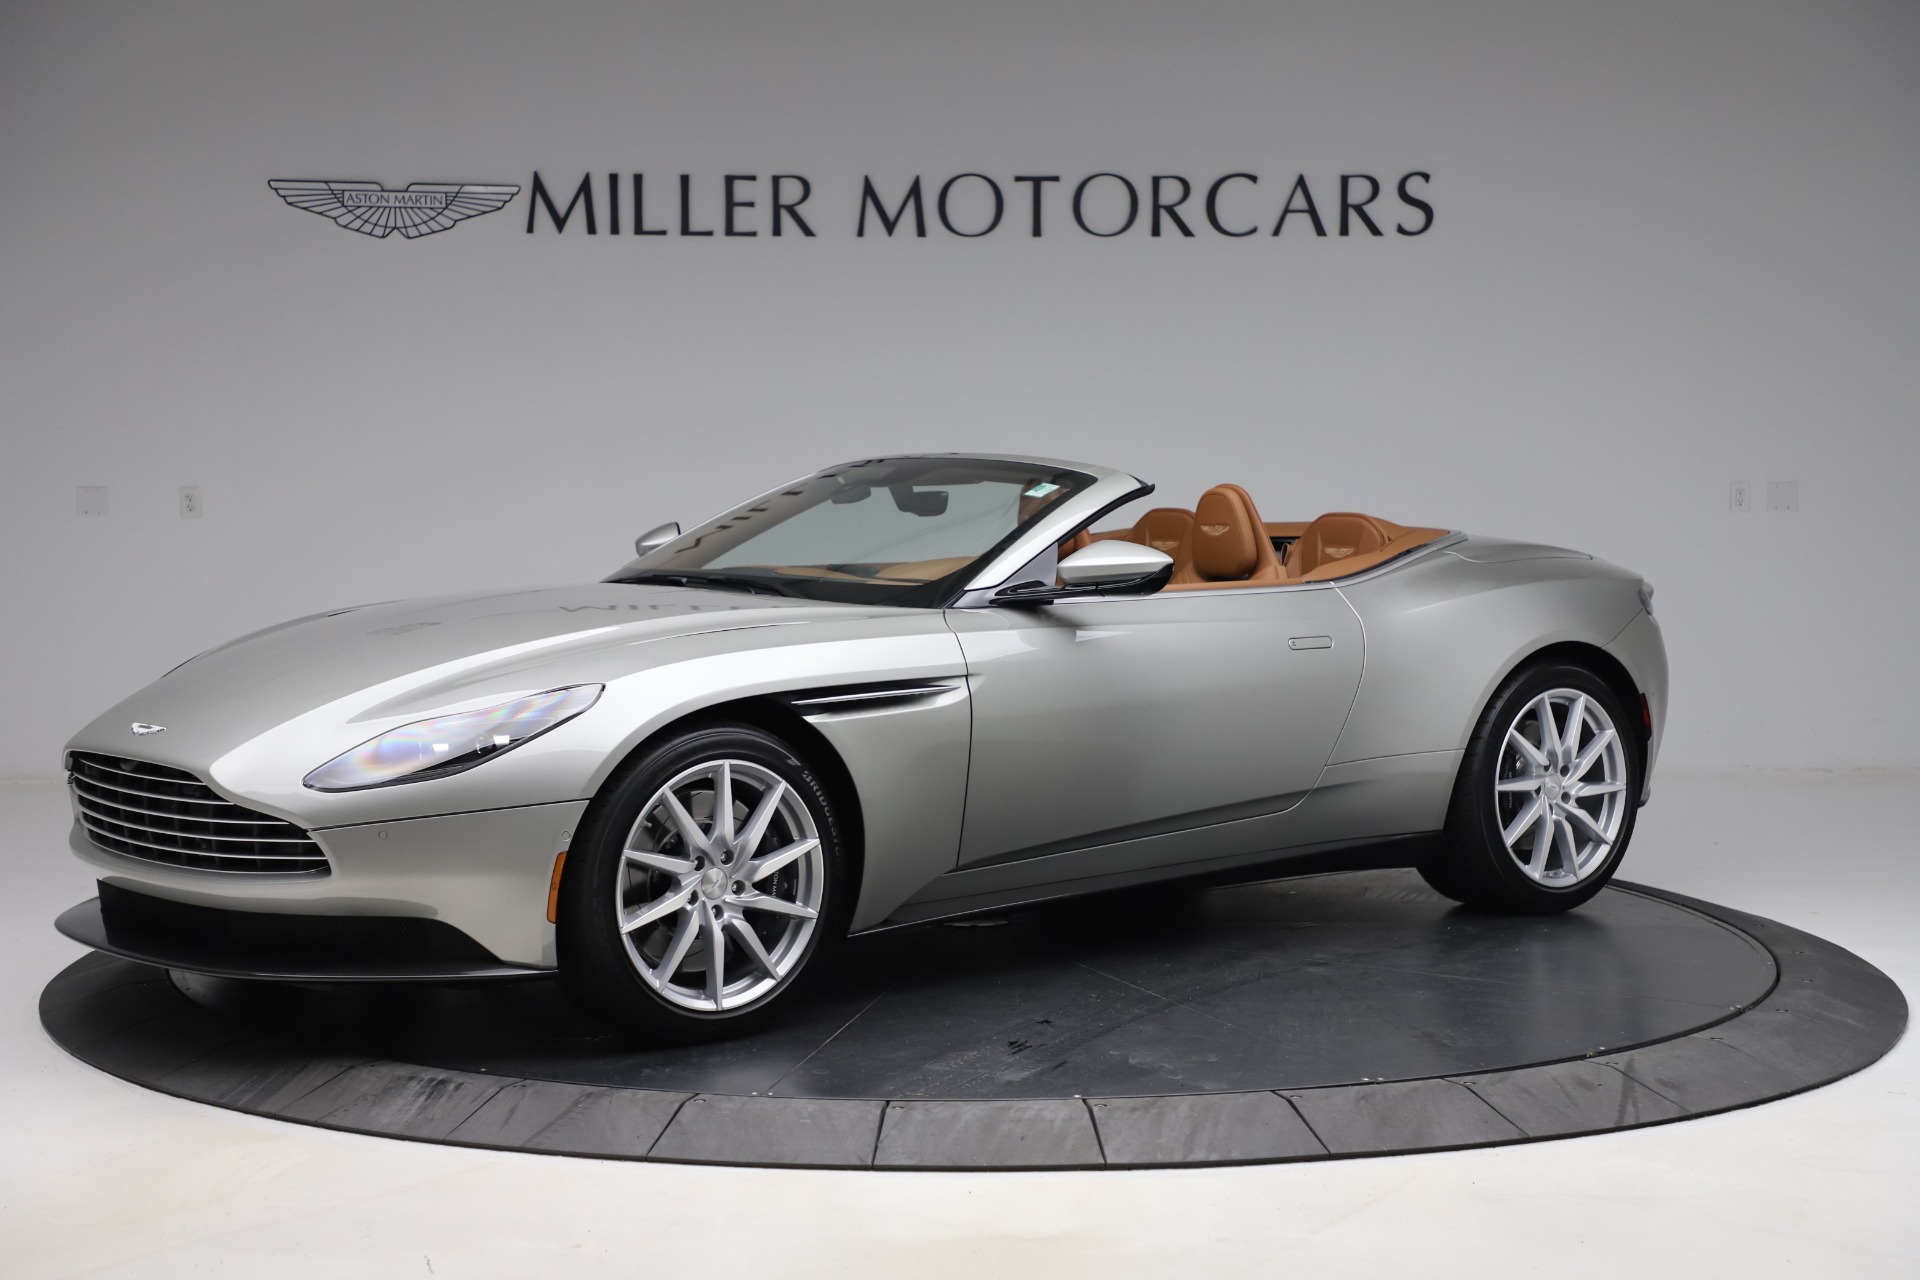 Used 2020 Aston Martin DB11 Volante Convertible for sale Sold at Maserati of Westport in Westport CT 06880 1